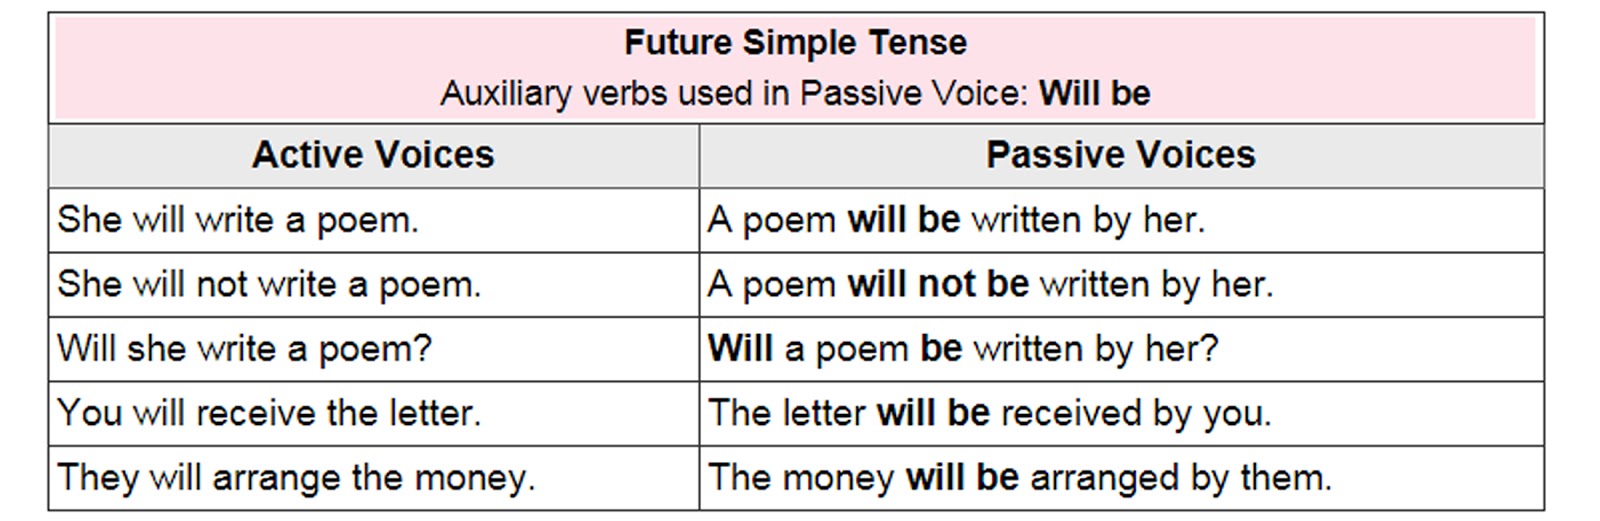 active-and-passive-voice-rules-simple-future-tense-english-grammar